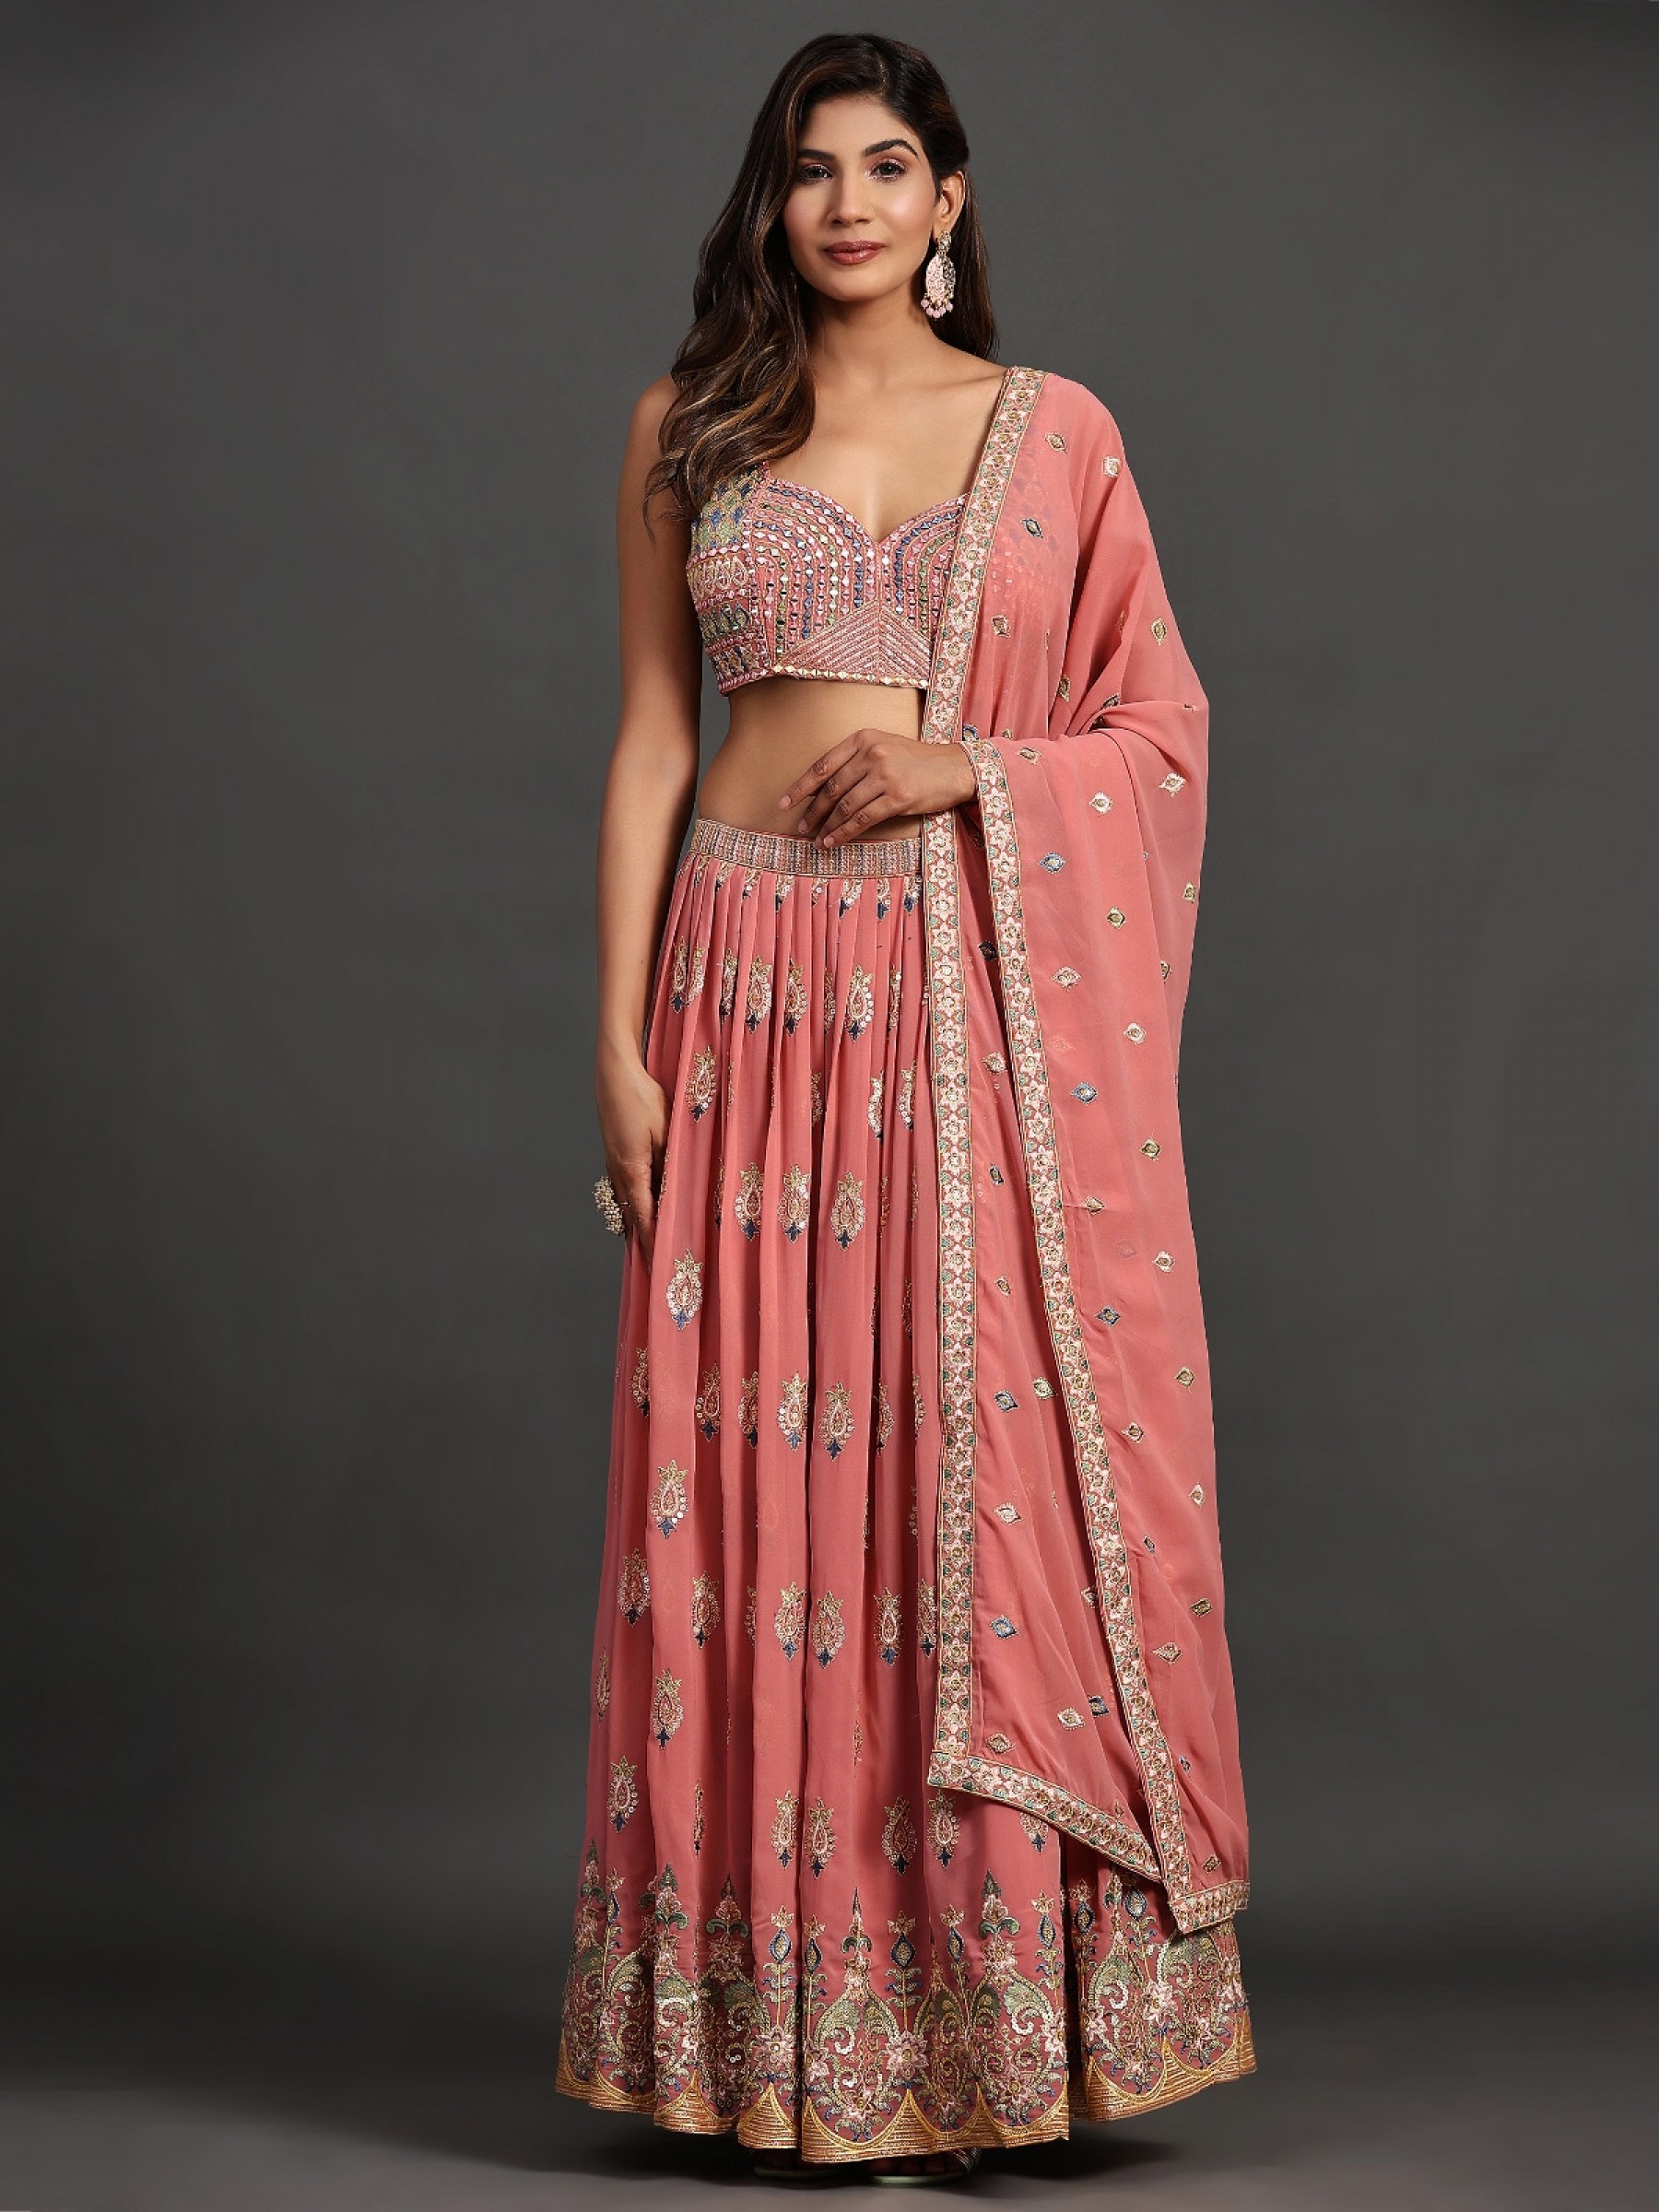 Georgette  Fabrics Party Wear Lehenga in Pink Color With Embroidery Work 